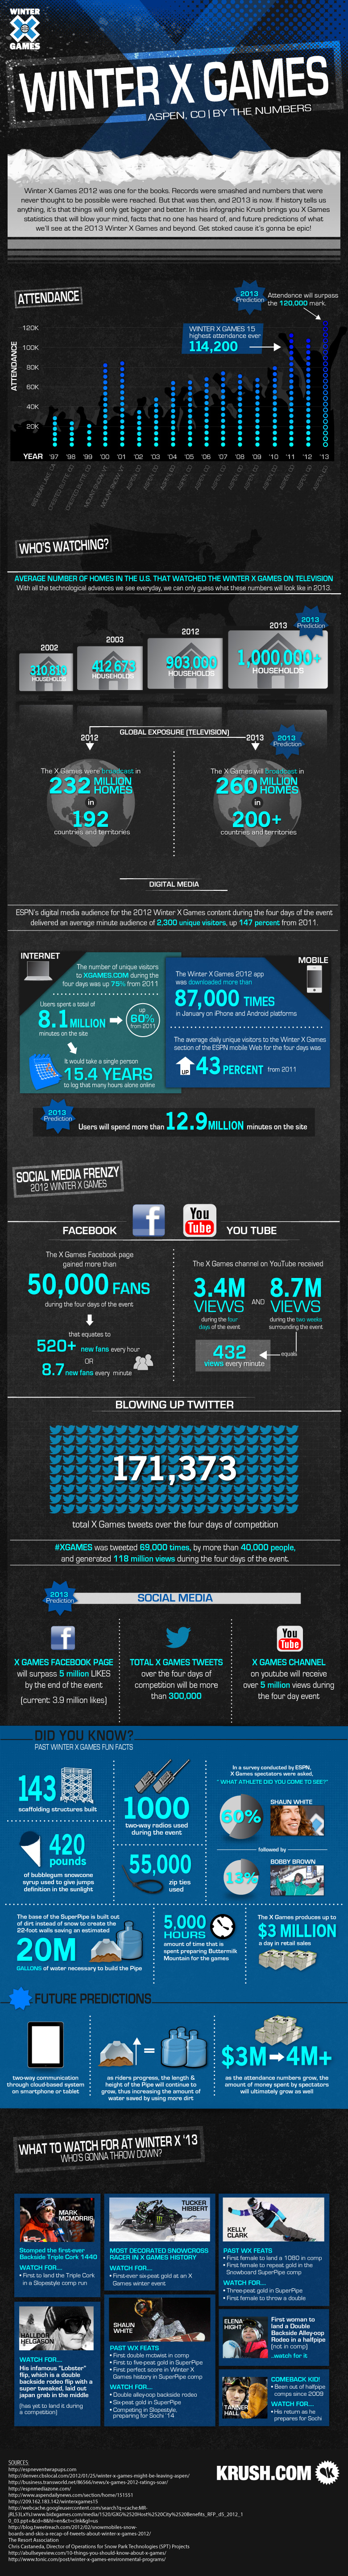 winter-x-games--by-the-numbers_50e4a9af00d86